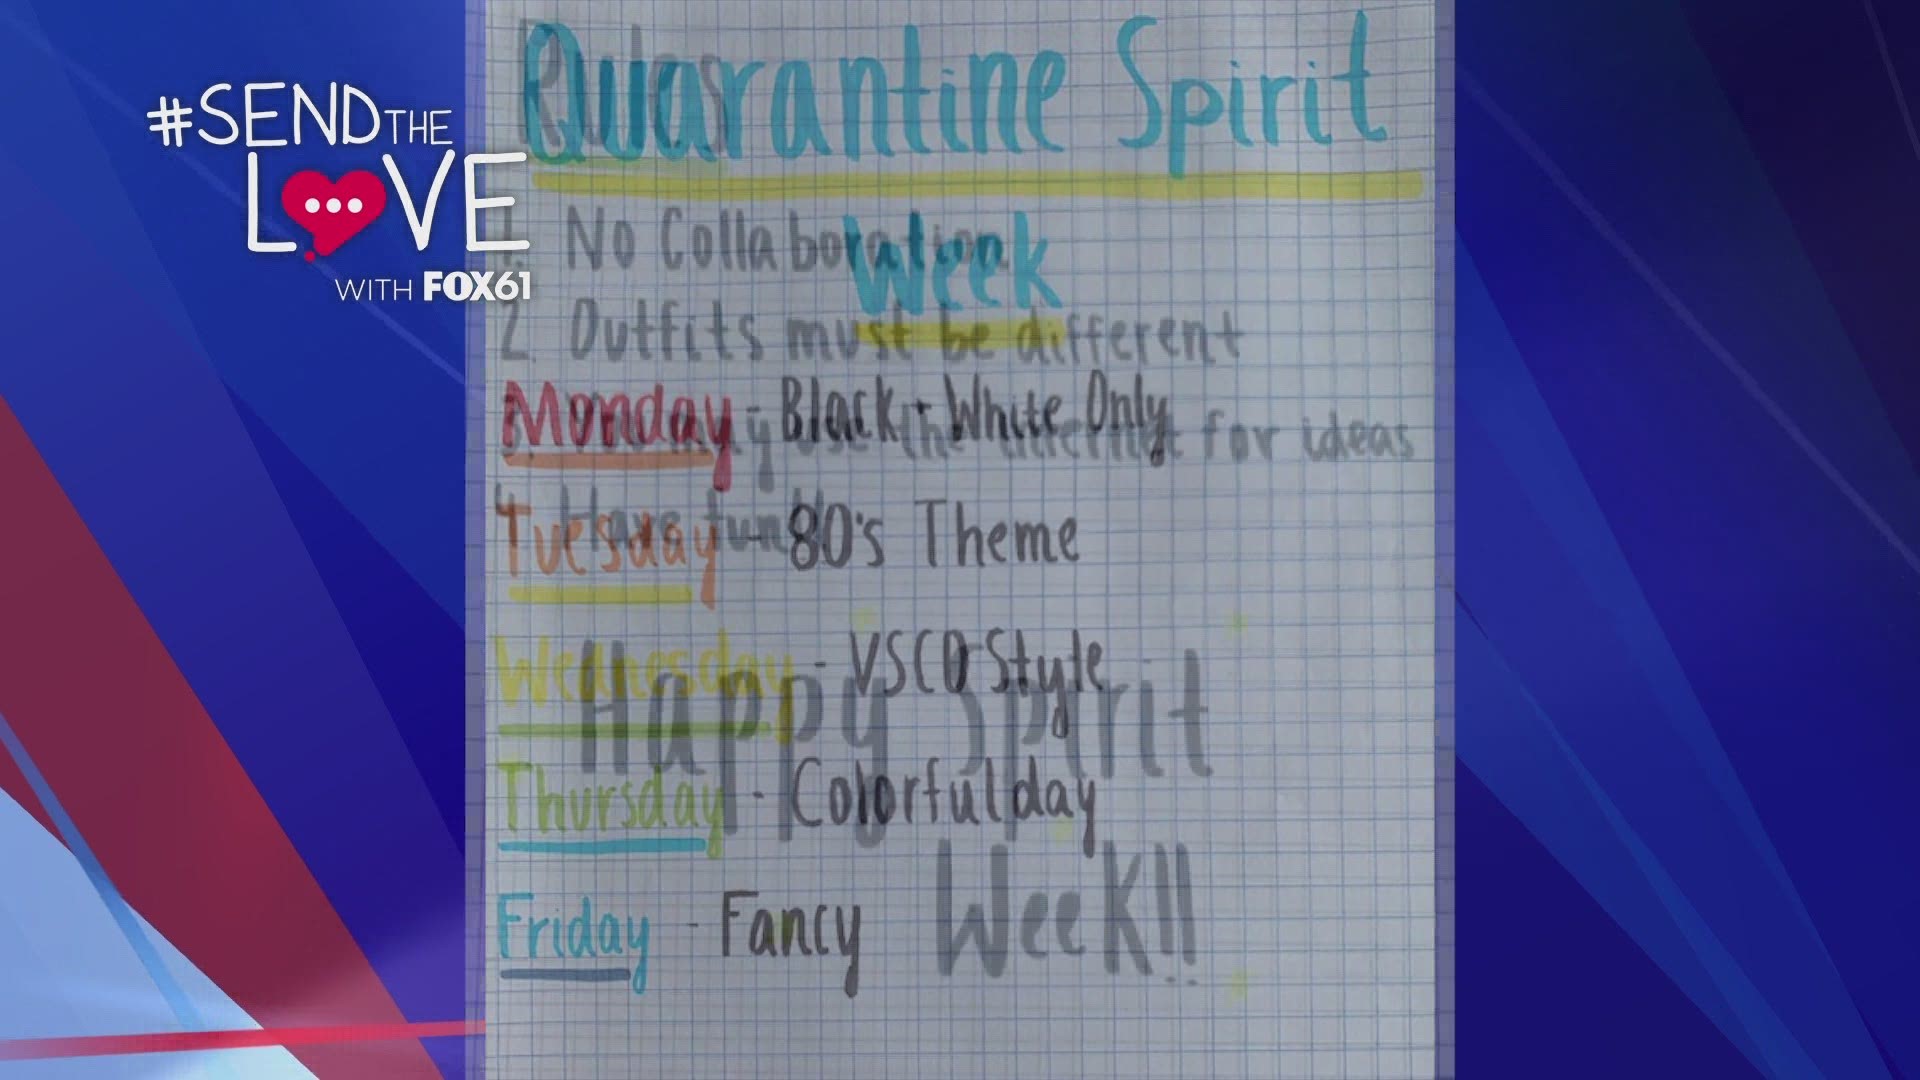 A middle schooler made up a virtual spirit week to get students involved and feel a sense of unity